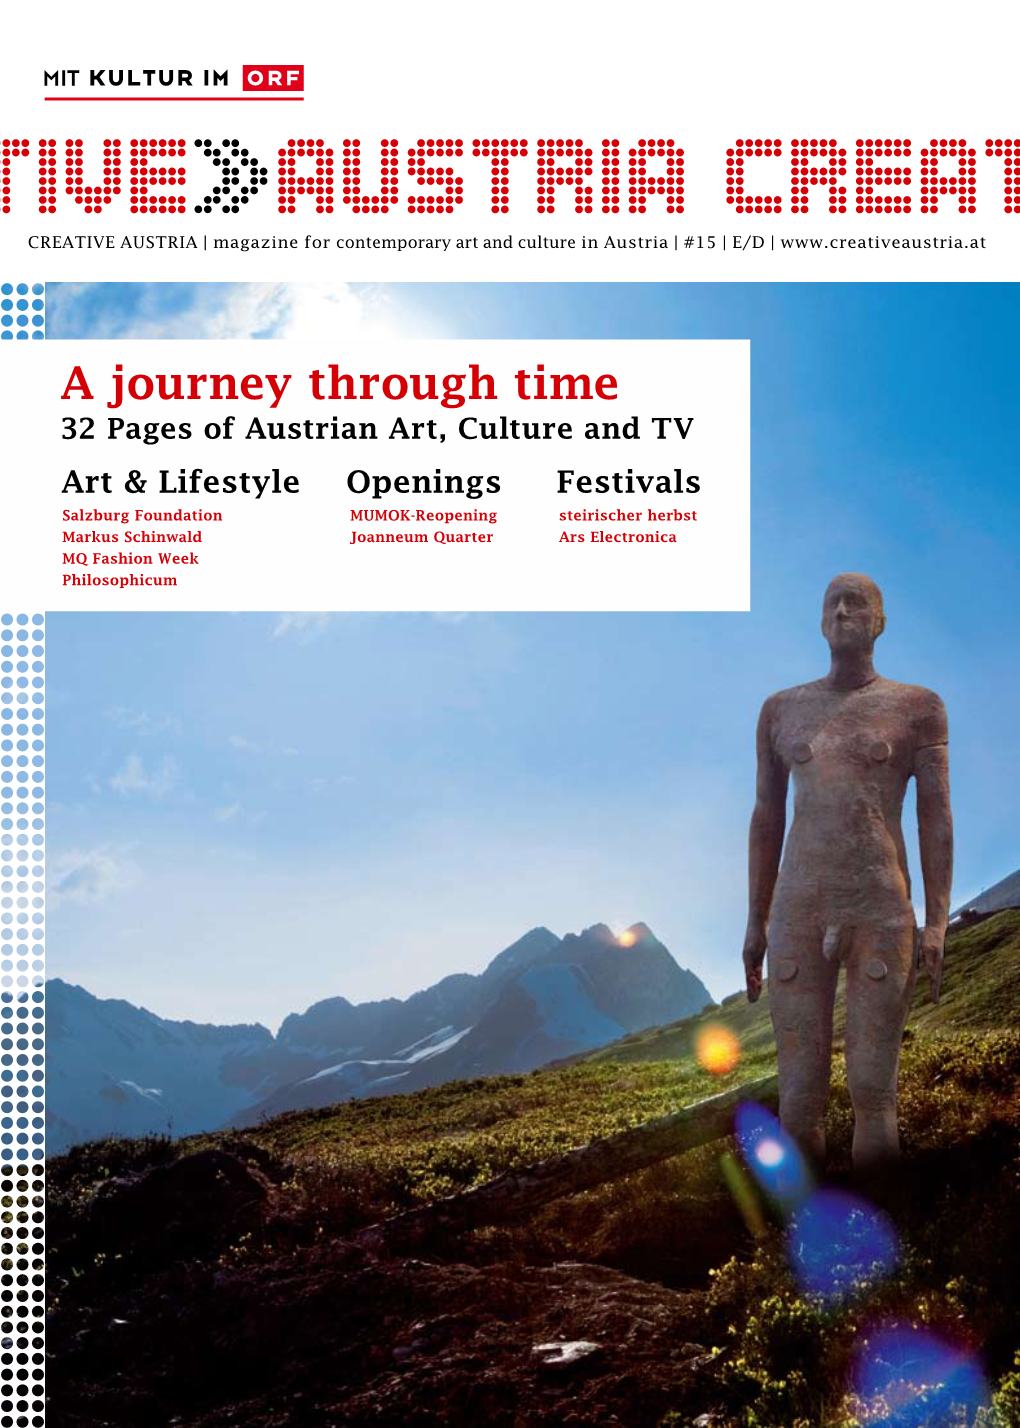 A Journey Through Time 32 Pages of Austrian Art, Culture and TV